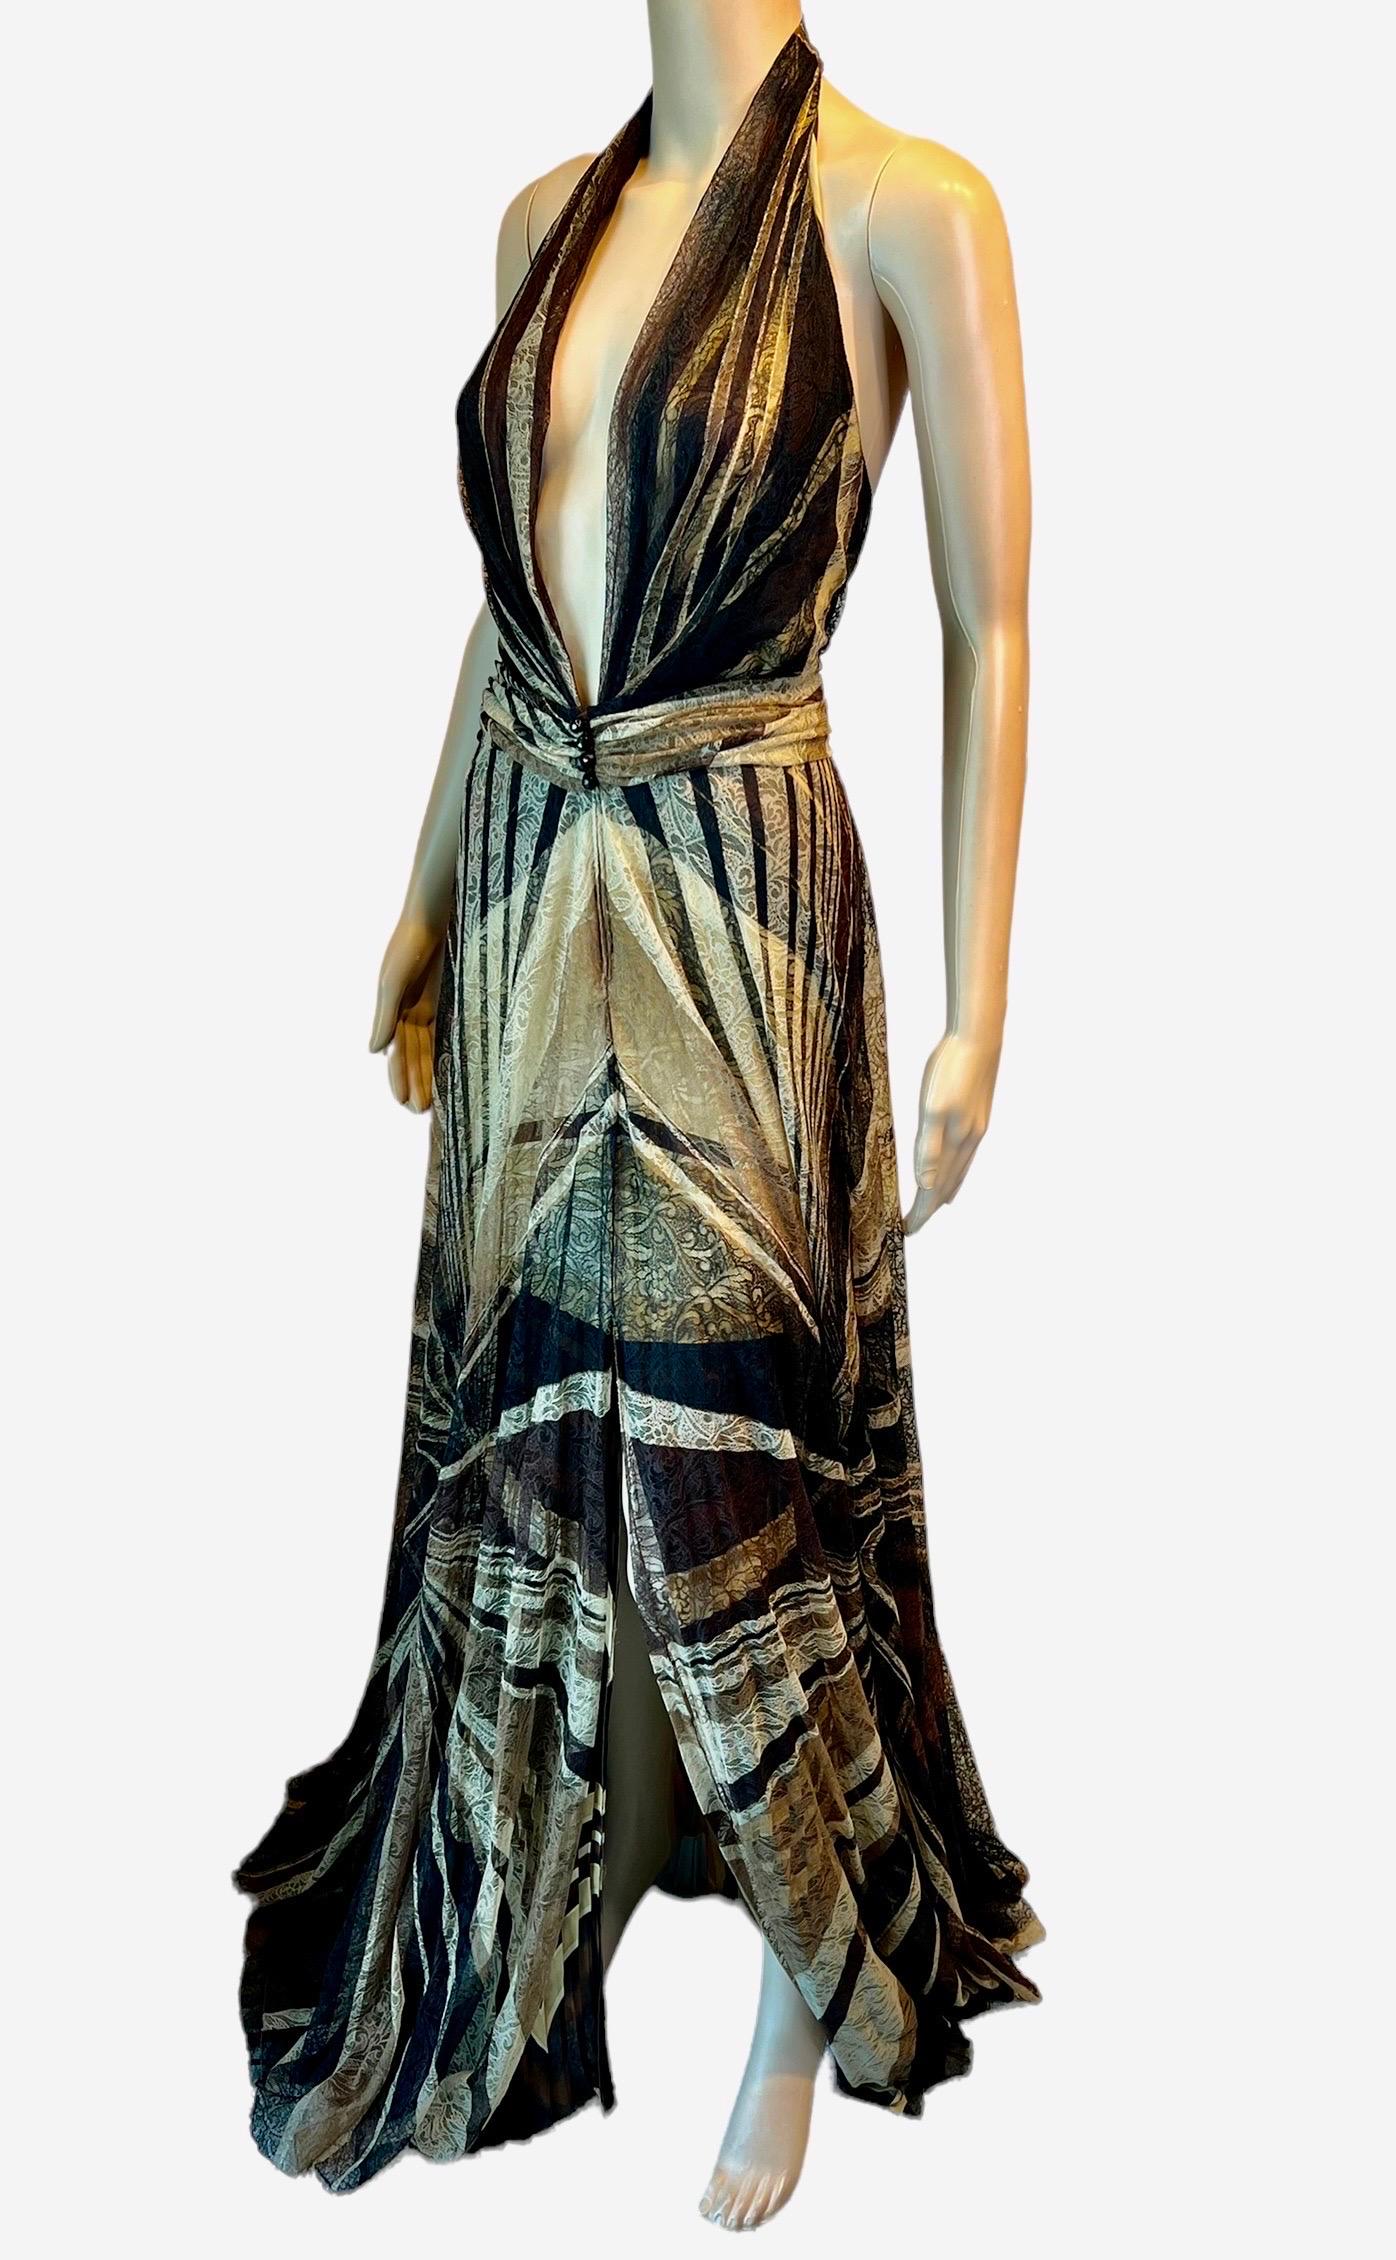 Gianni Versace F/W 2000 Runway Plunging Lace Silk Backless Evening Dress Gown For Sale 2